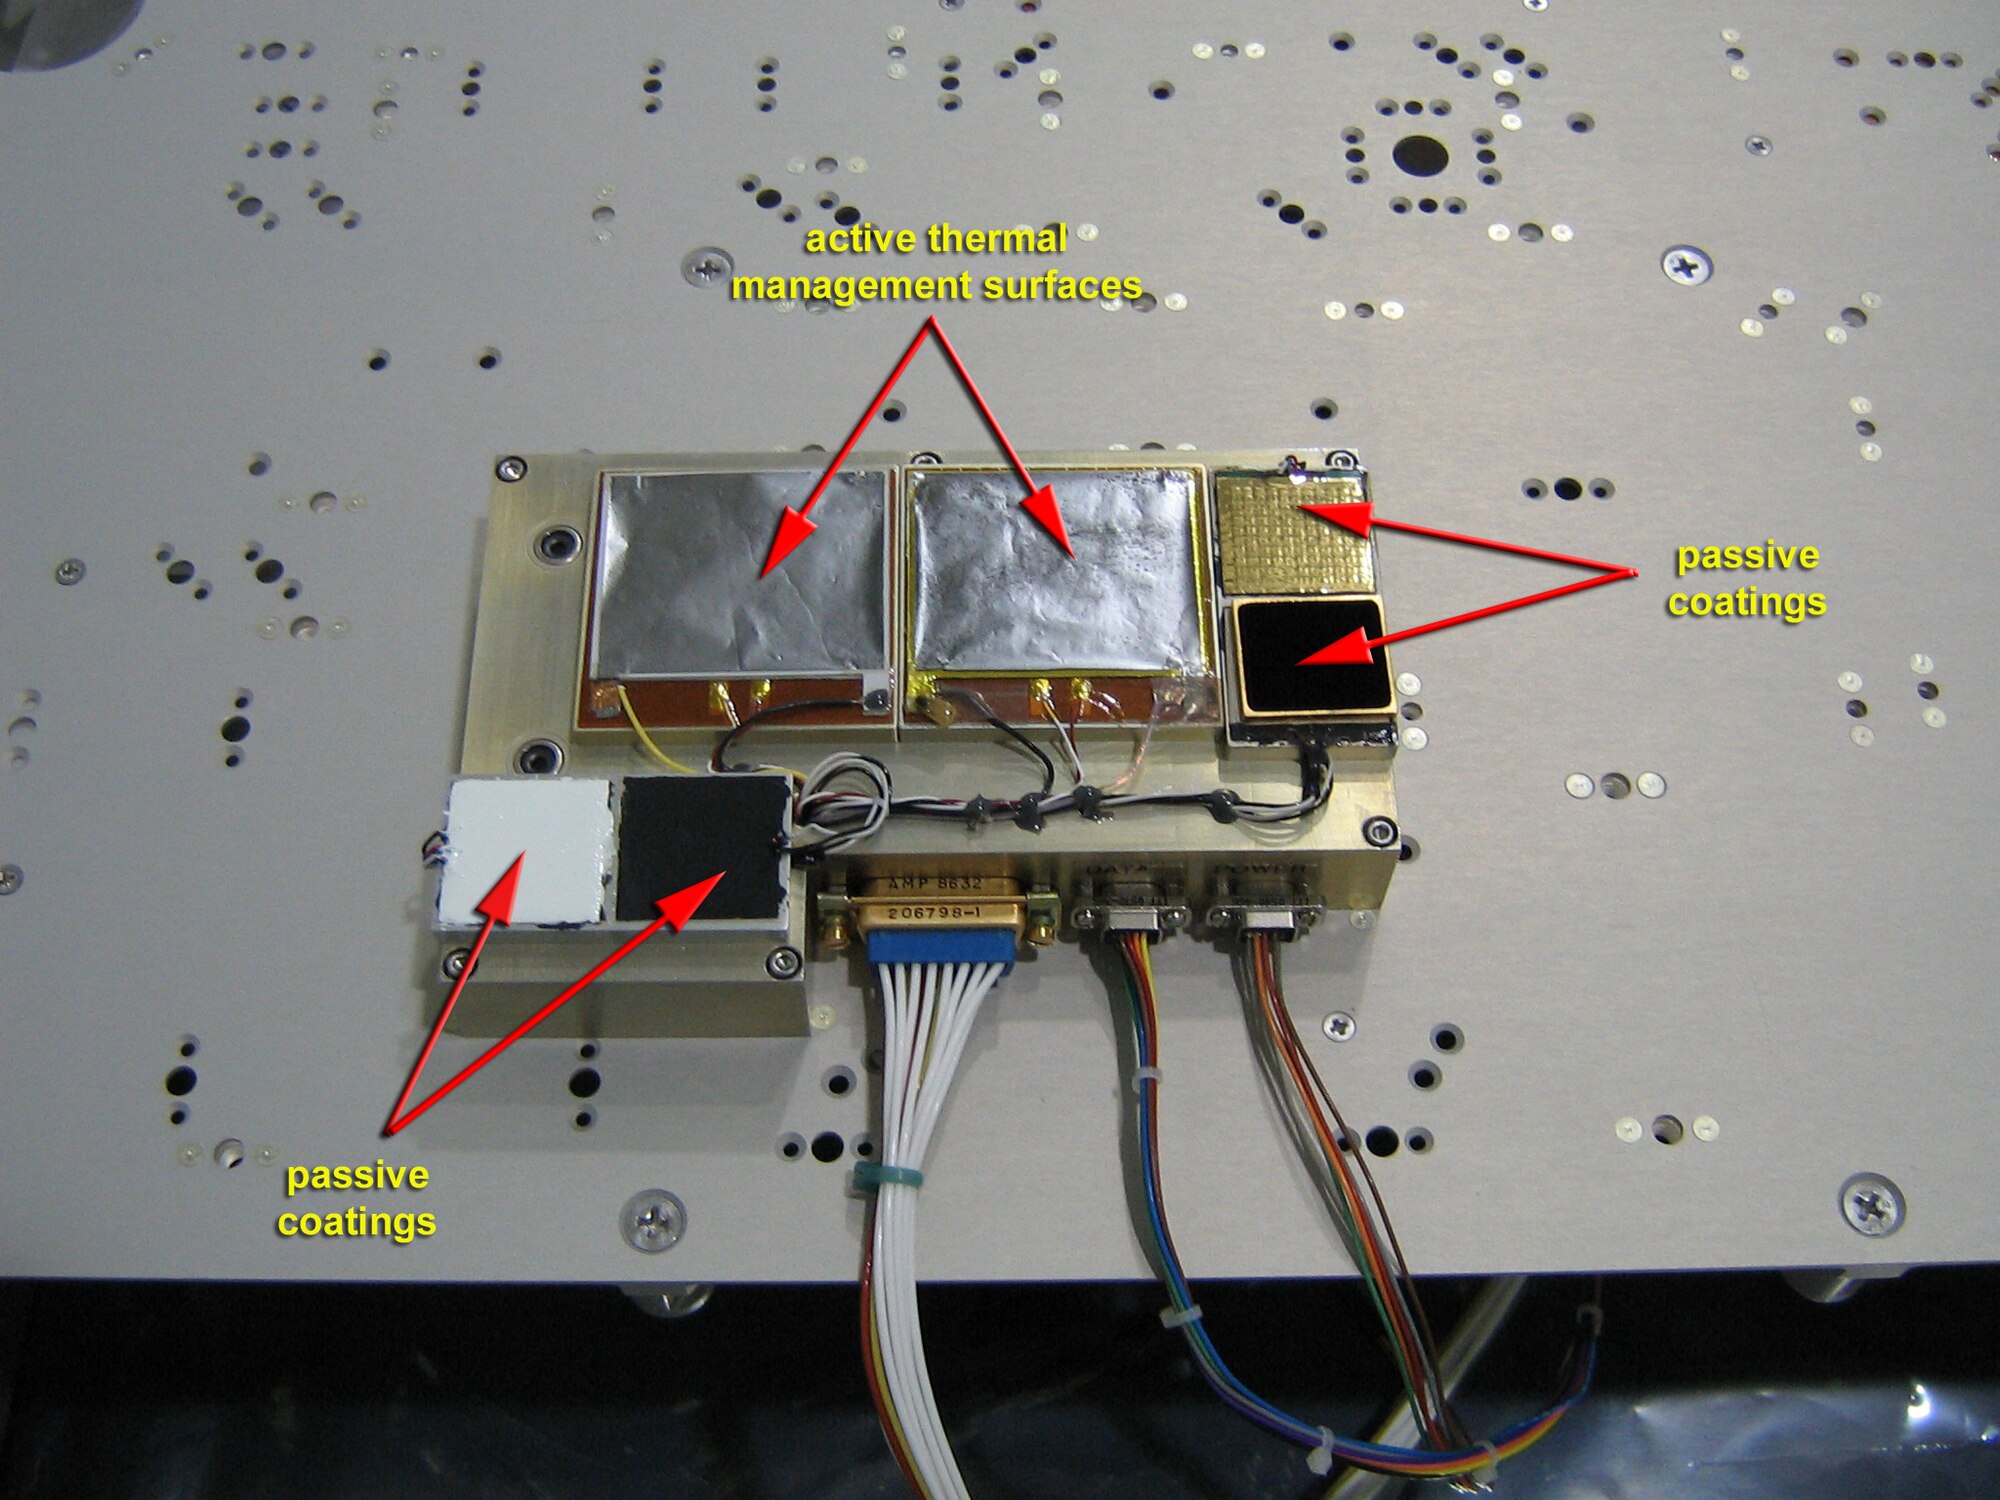 Two active thermal management surfaces and four passive coatings packaged on the MISSE-6 flight module are shown. Pictures are courtesy of Sensortek Inc. and ATEC Inc.